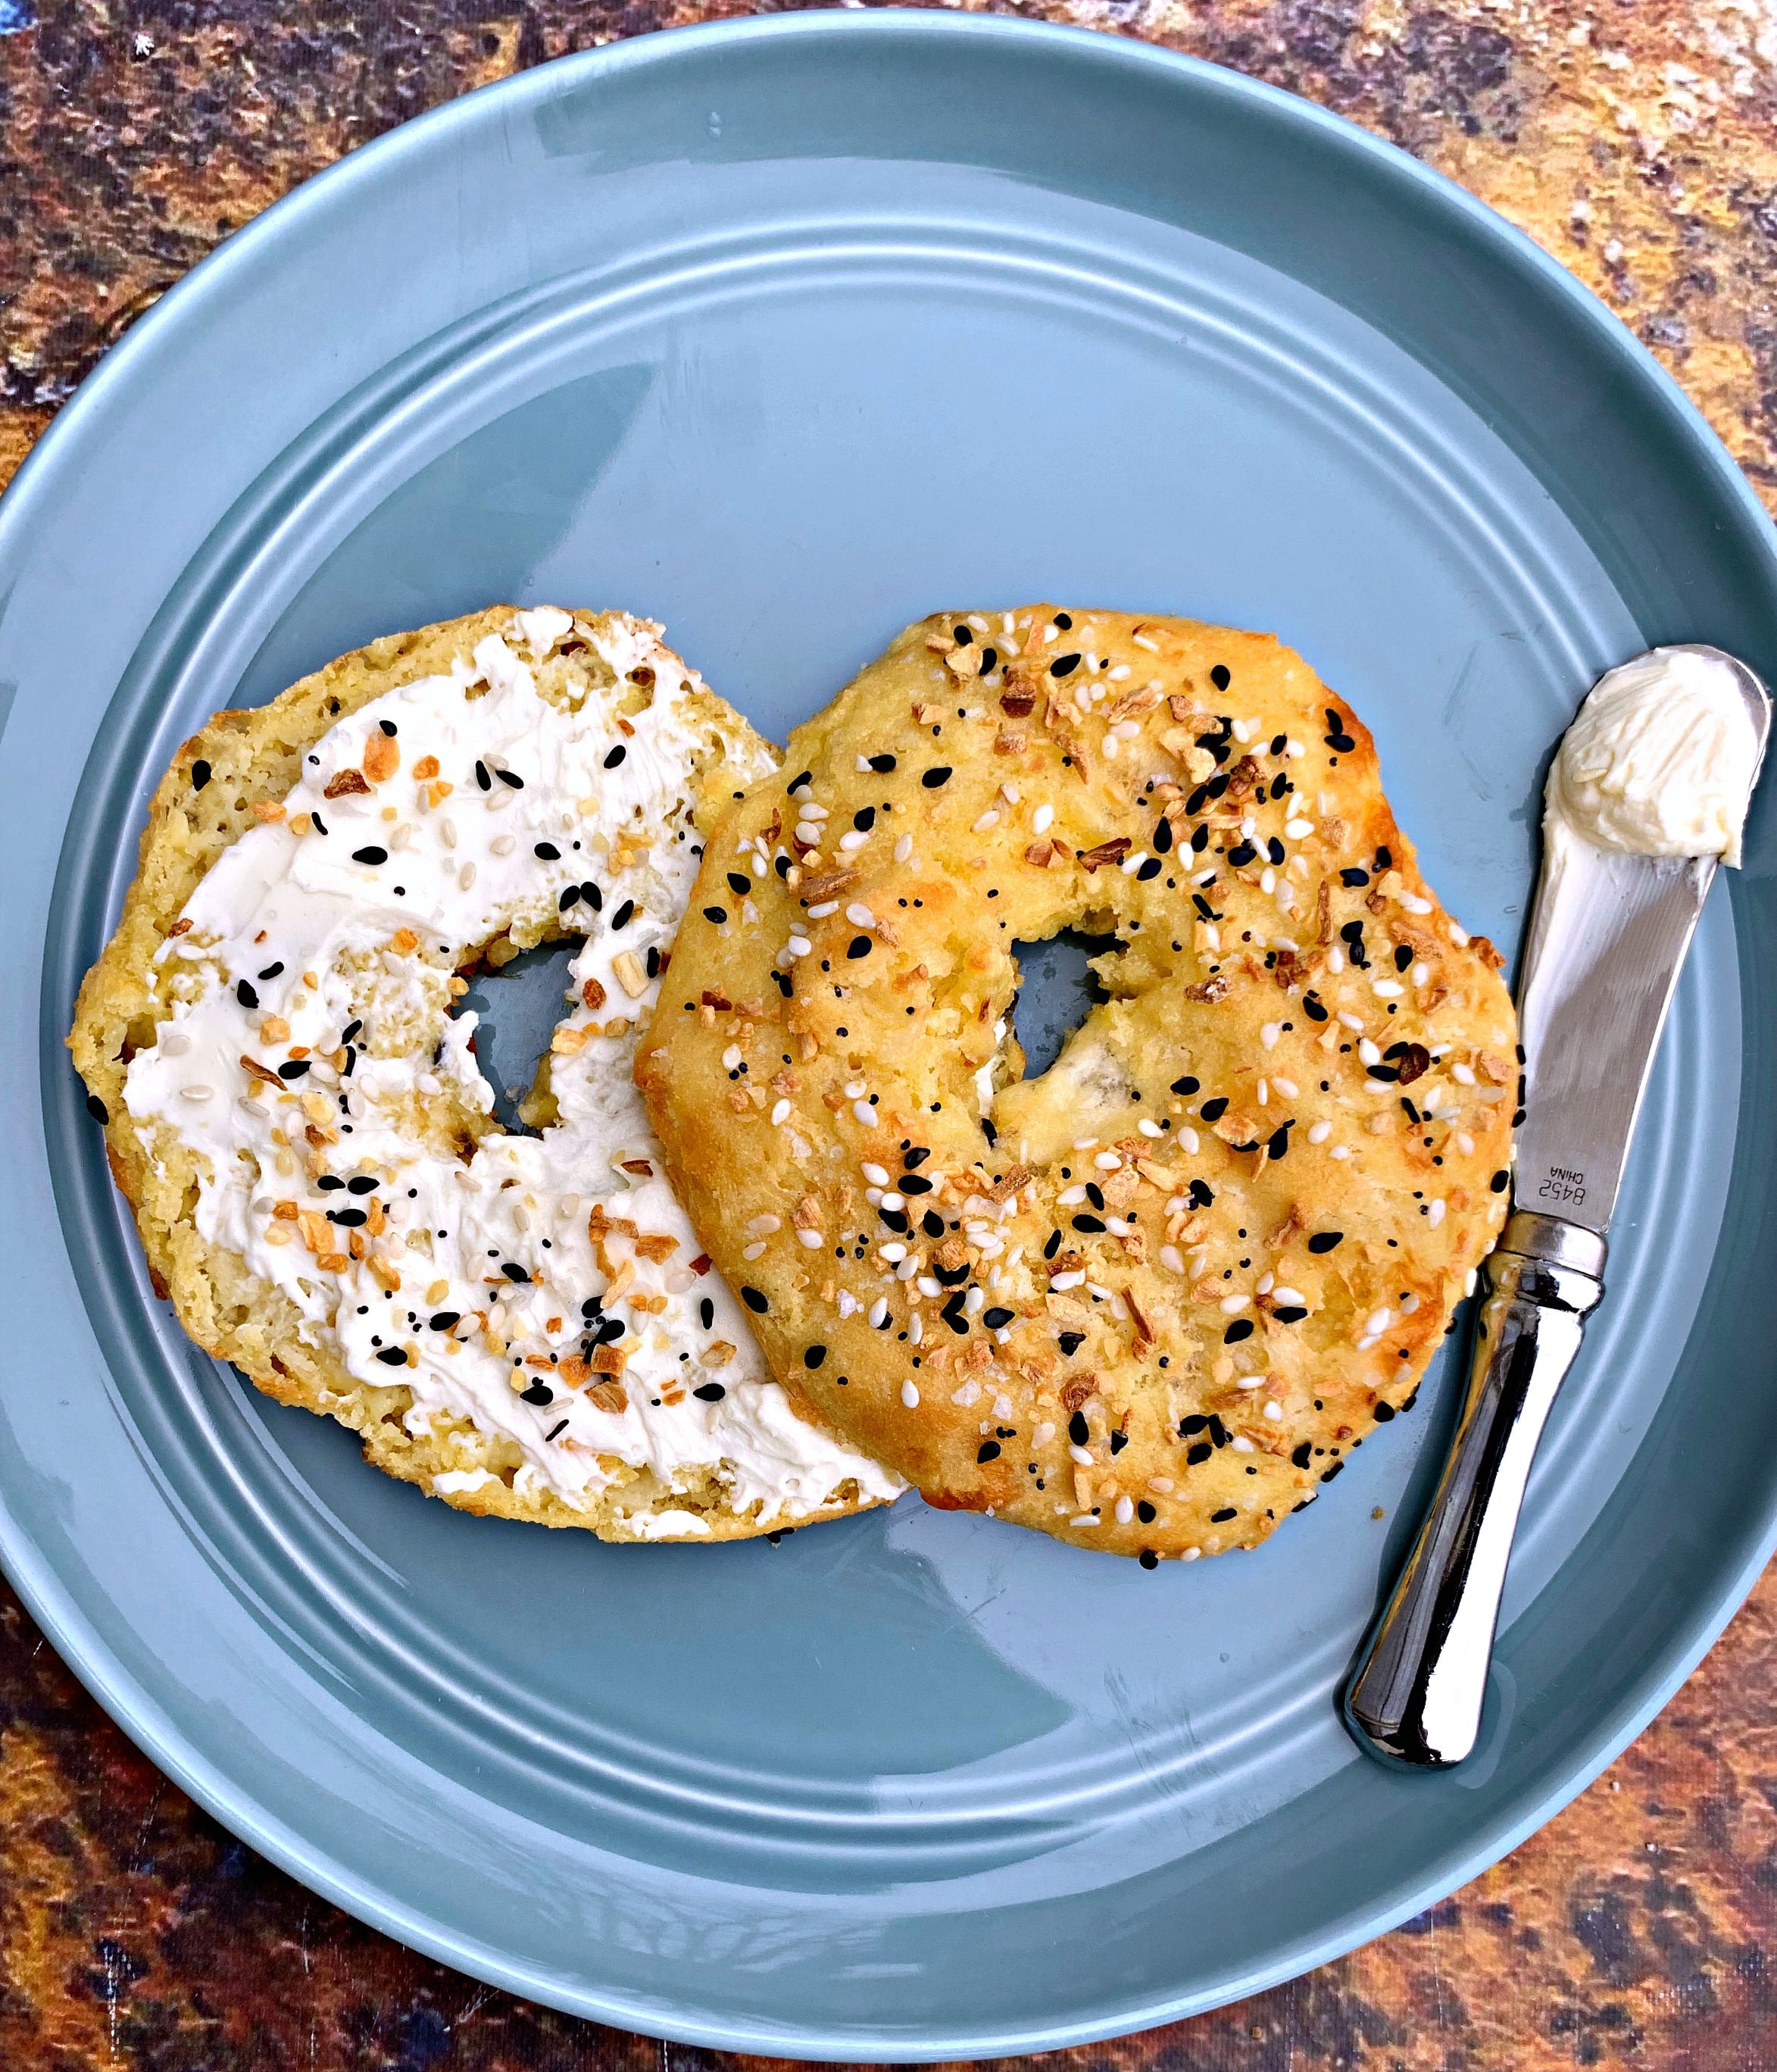 cooked keto fathead bagels on a blue plate with cream cheese